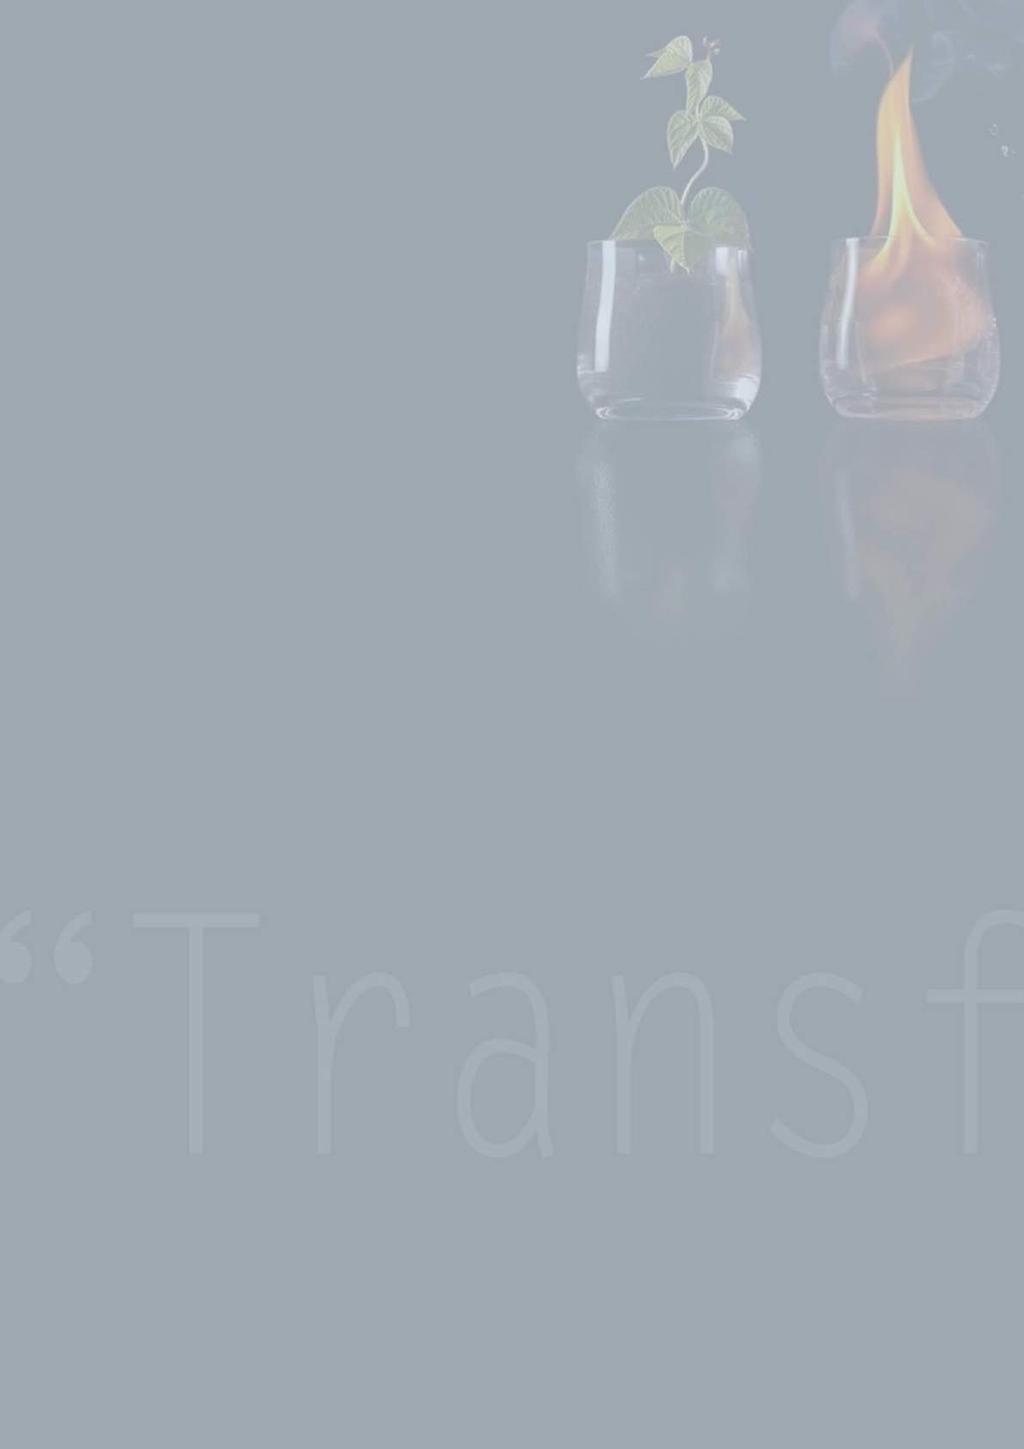 INTRODUCING THE PROGRAM UUTRANSFORMATION/traveller o UUTRANSFORMATION The two modules of the workshop TRANSFORMATION are given regularly in Rio de Janeiro and São Paulo: an introduction to the